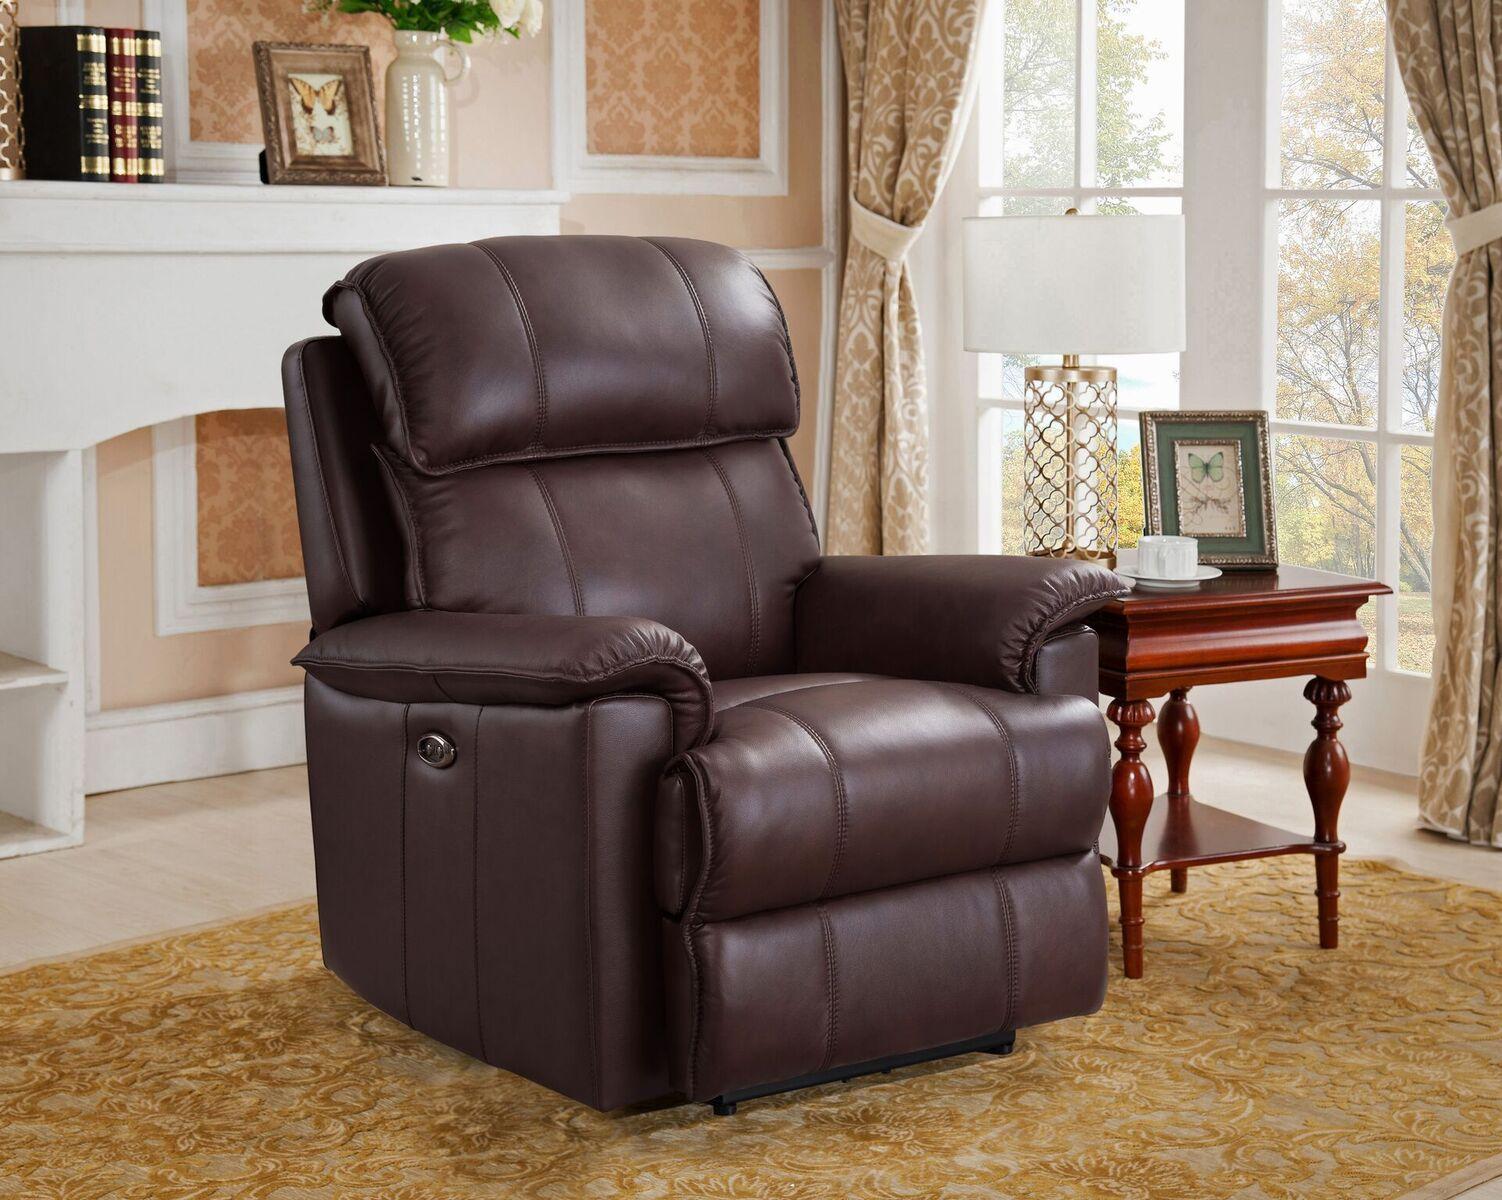 

    
Amax Leather Hydeline Harwood Recliner Chair Brown Harwood-P-BRN
